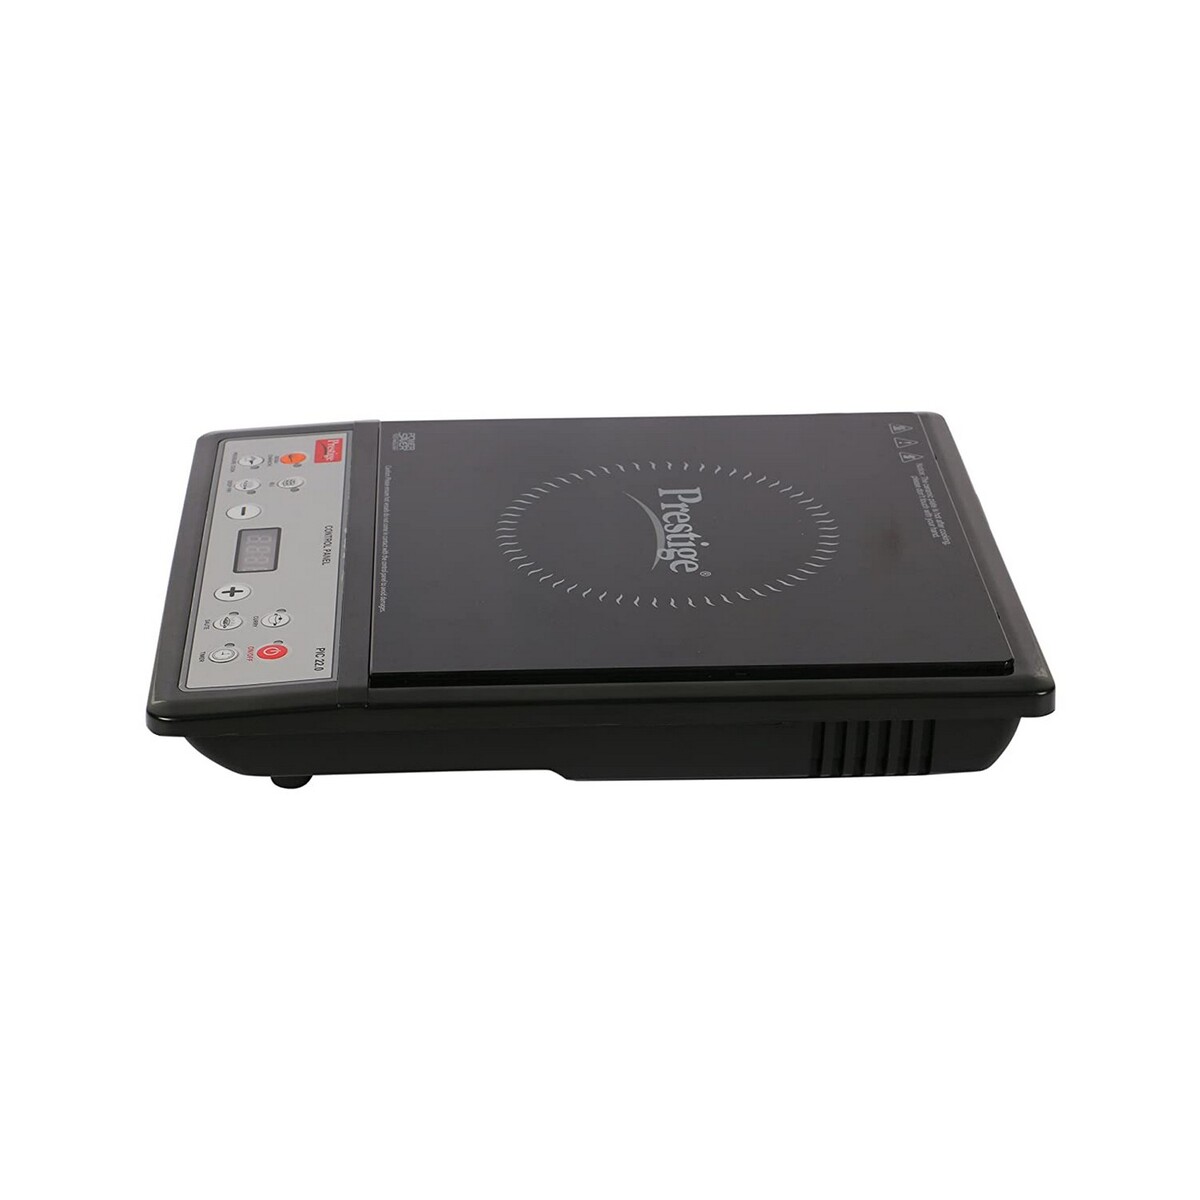 Prestige Induction Cooktop PIC 22.0